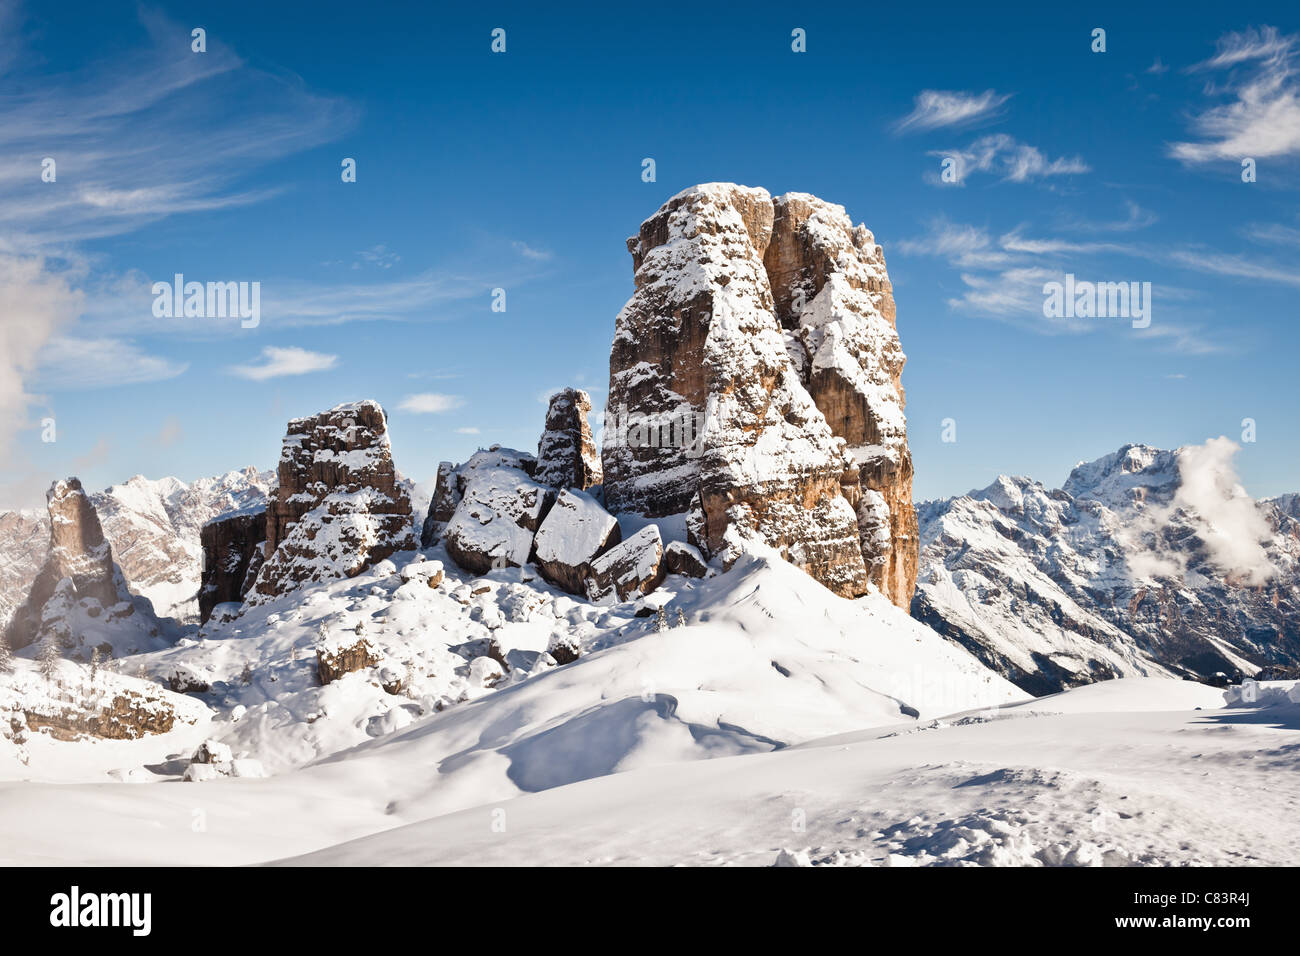 Snow covered rock formations Stock Photo